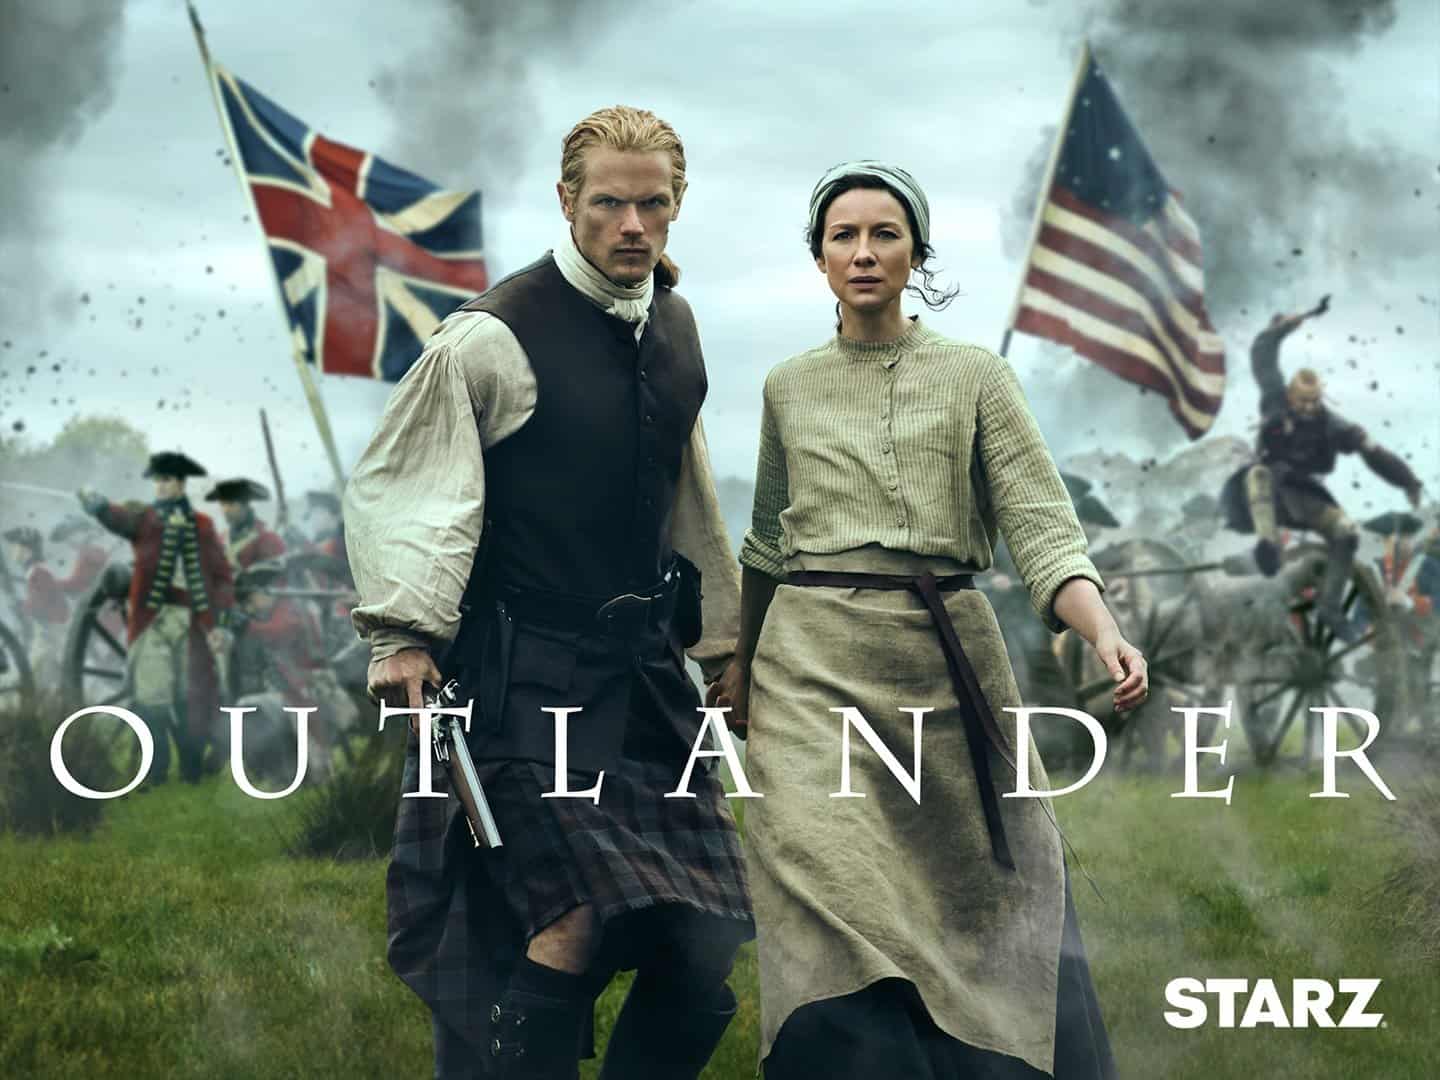 Outlander, the historical drama created by Ronald D. Moore.